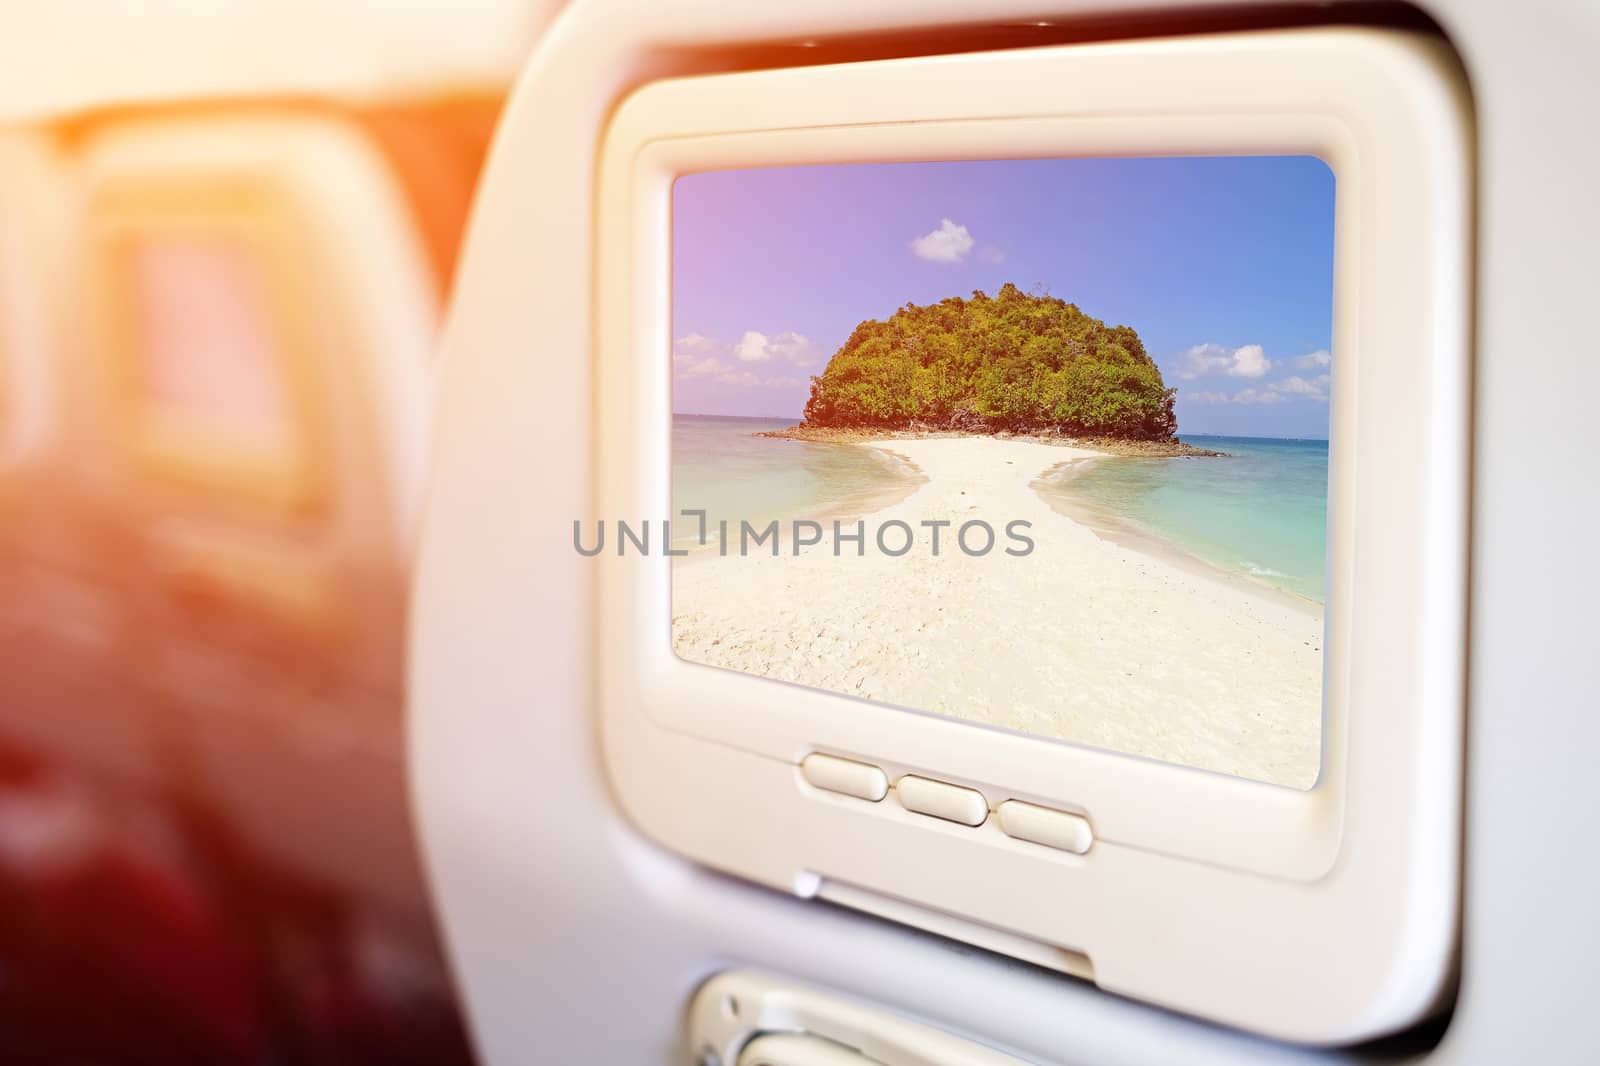 Aircraft monitor in front of passenger seat showing Miracle beac by Surasak